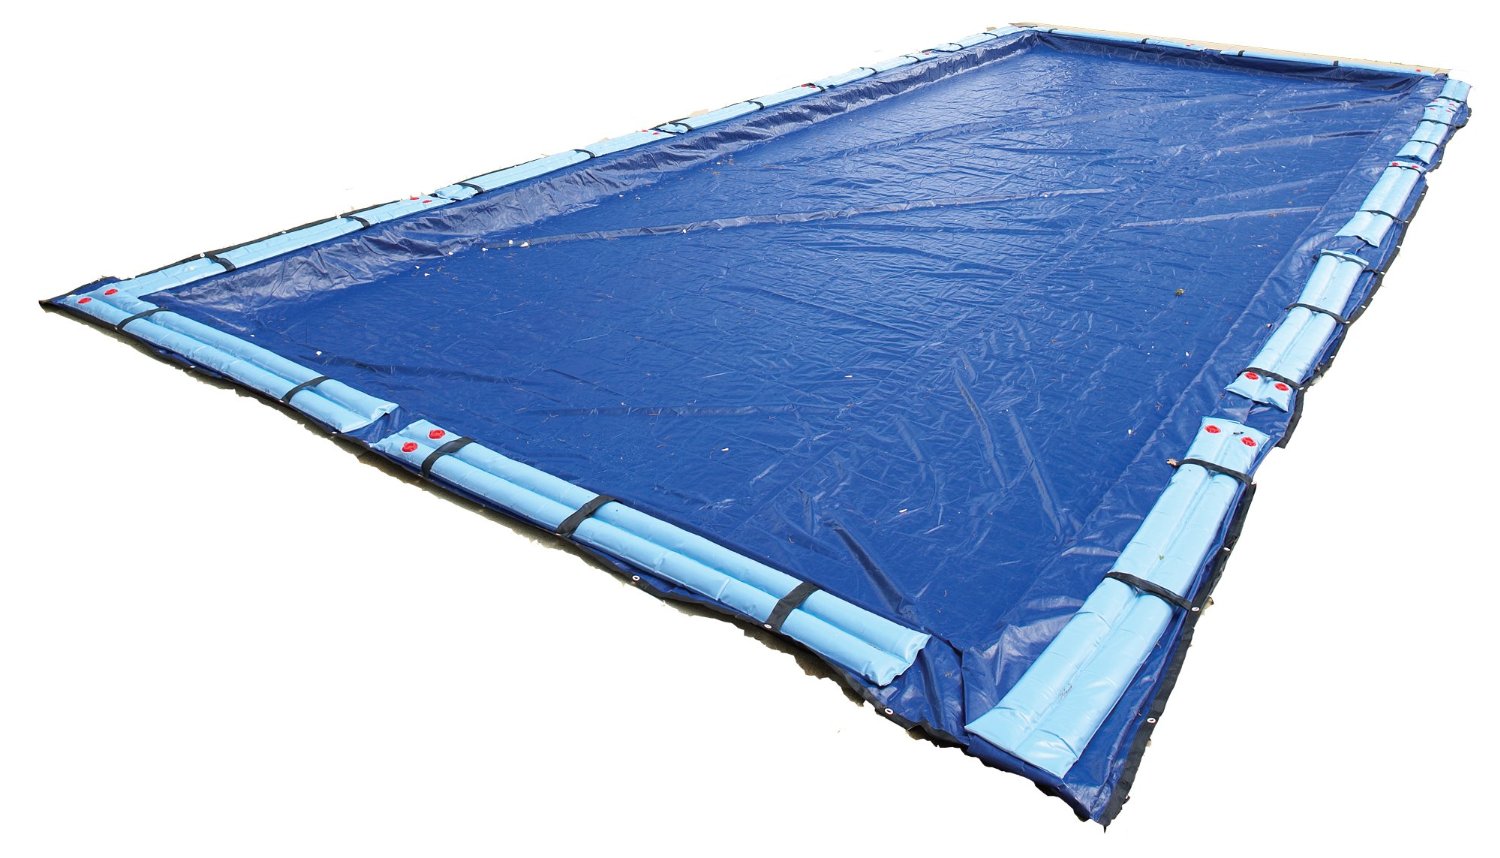 Reboxed Winter Pool Cover Inground 20X40 Ft Rectangle Arctic Armor 15 Yr eBay